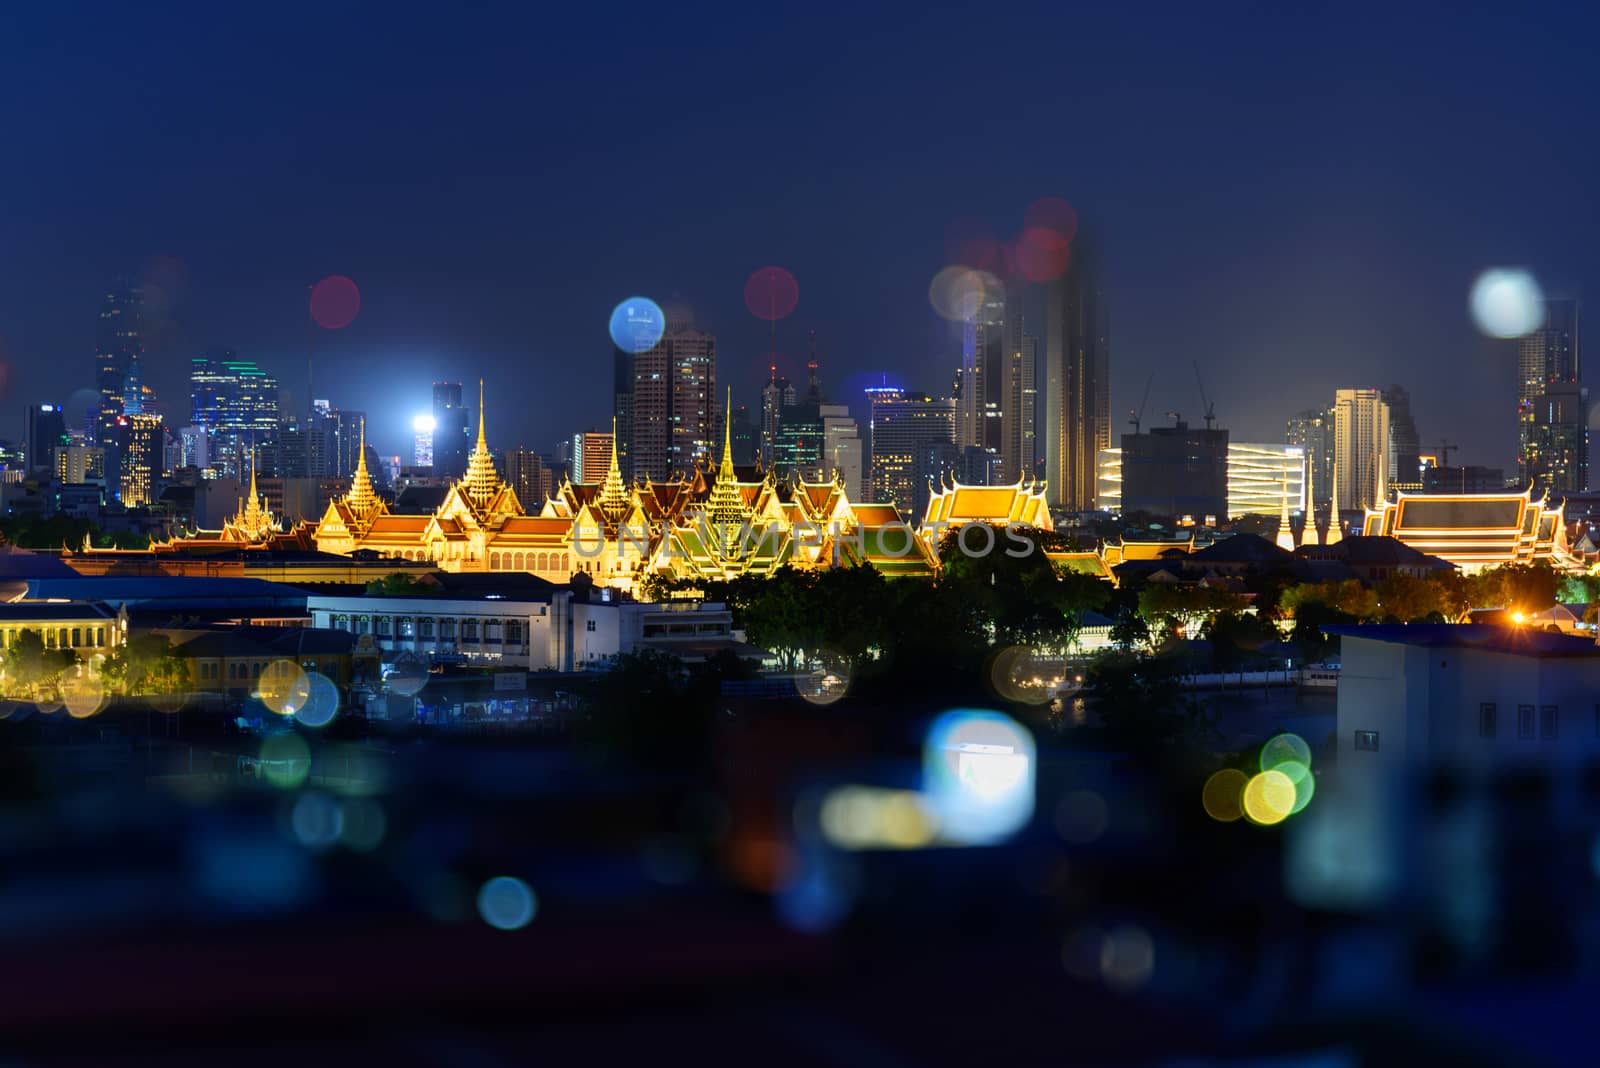 The grand palace of Thailand with high building behind by rukawajung